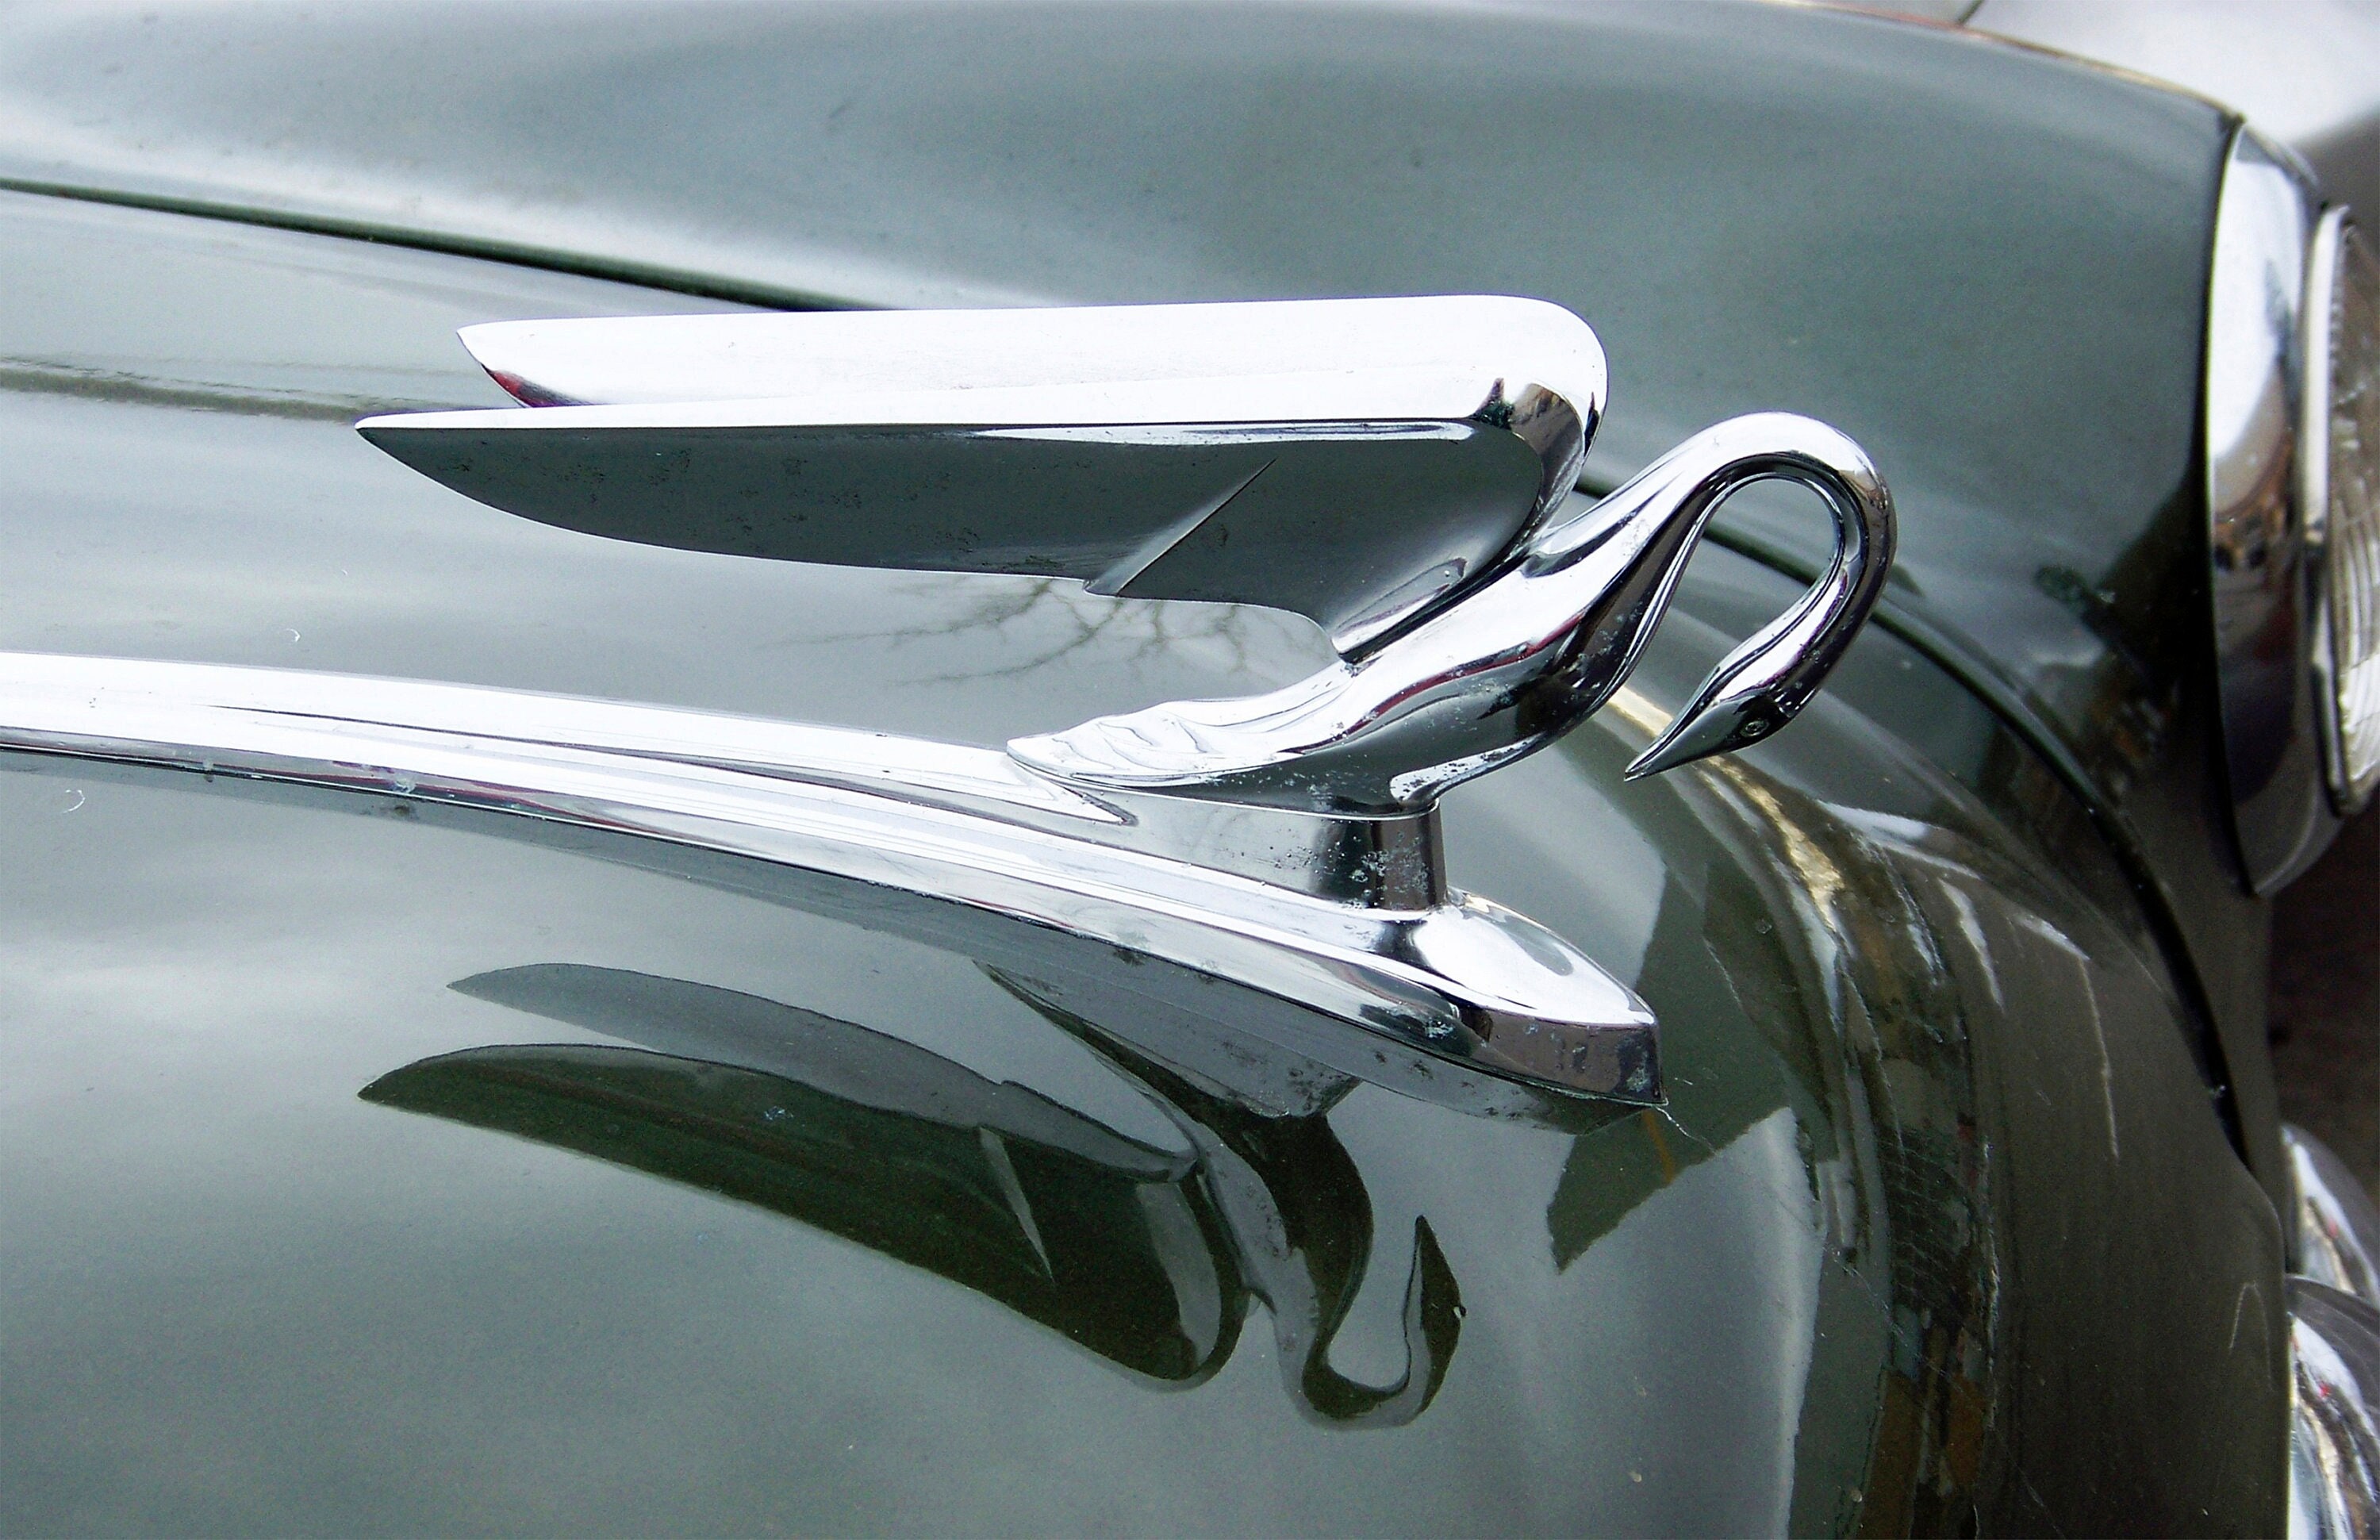 Vintage Packard With Swan Hood Ornament, Classic Car Image, 200dpi